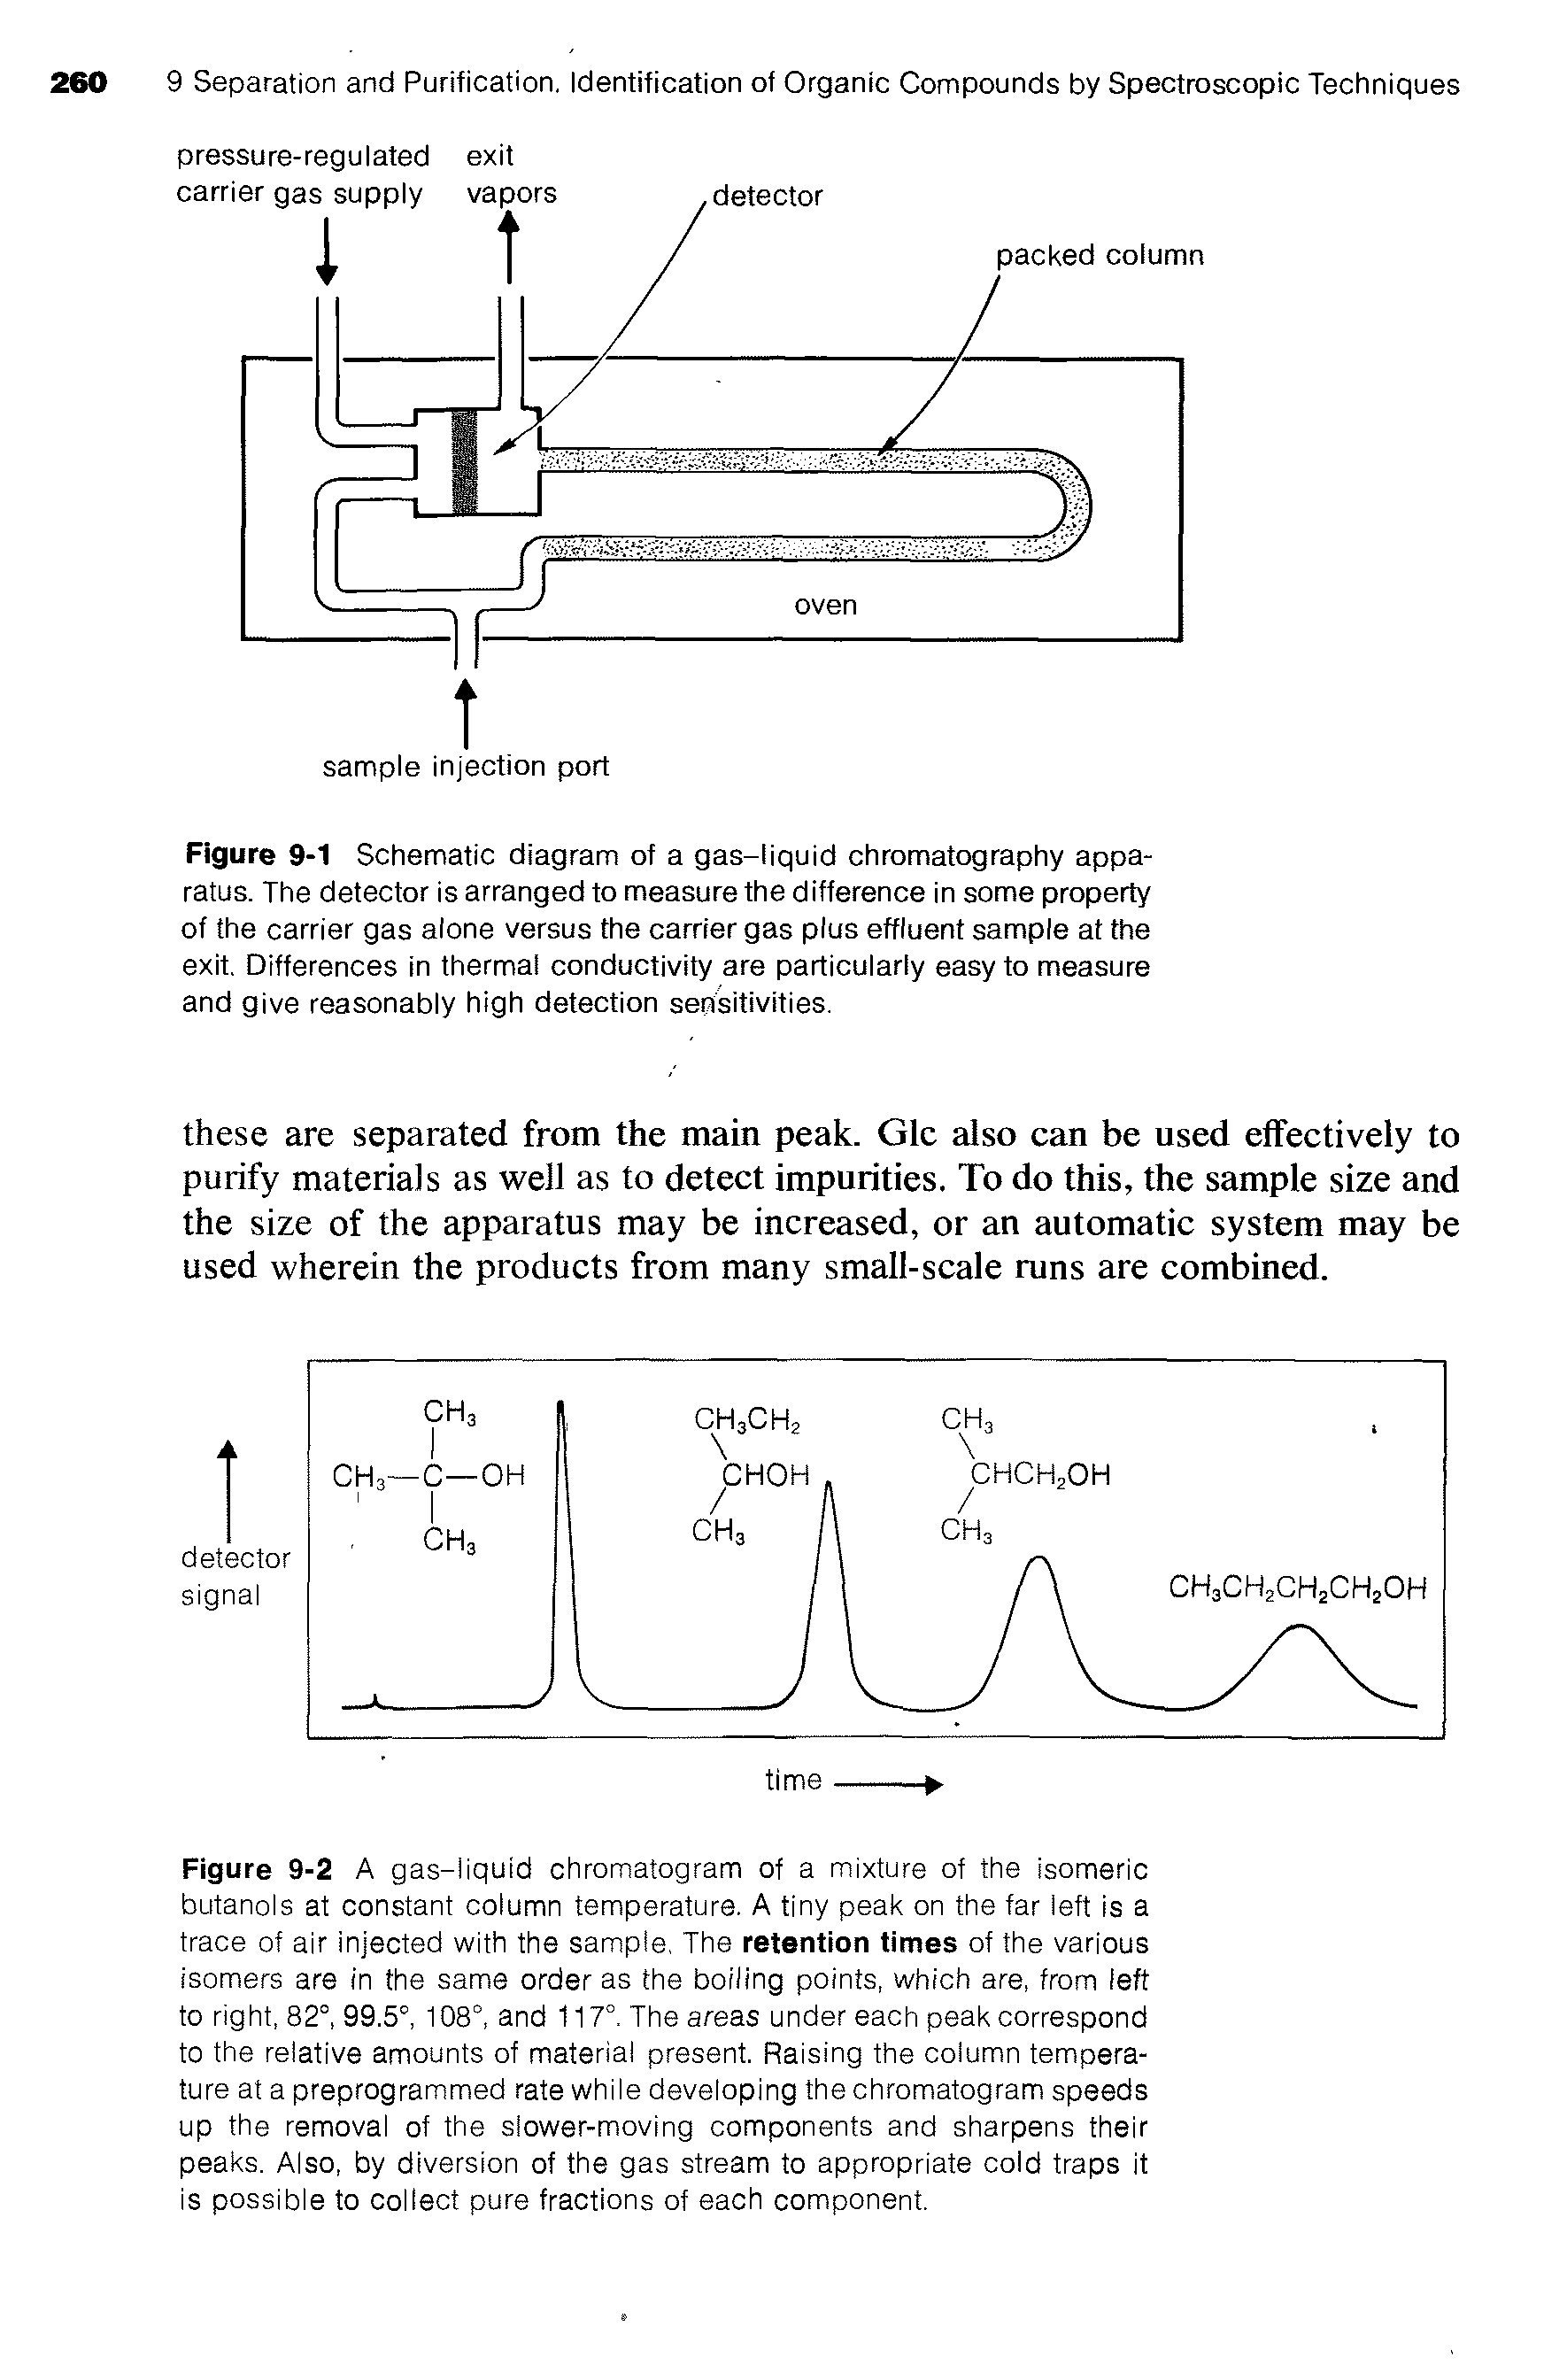 Figure 9-1 Schematic diagram of a gas-liquid chromatography apparatus. The detector is arranged to measure the difference in some property of the carrier gas alone versus the carrier gas plus effluent sample at the exit. Differences in thermal conductivity are particularly easy to measure and give reasonably high detection sensitivities.